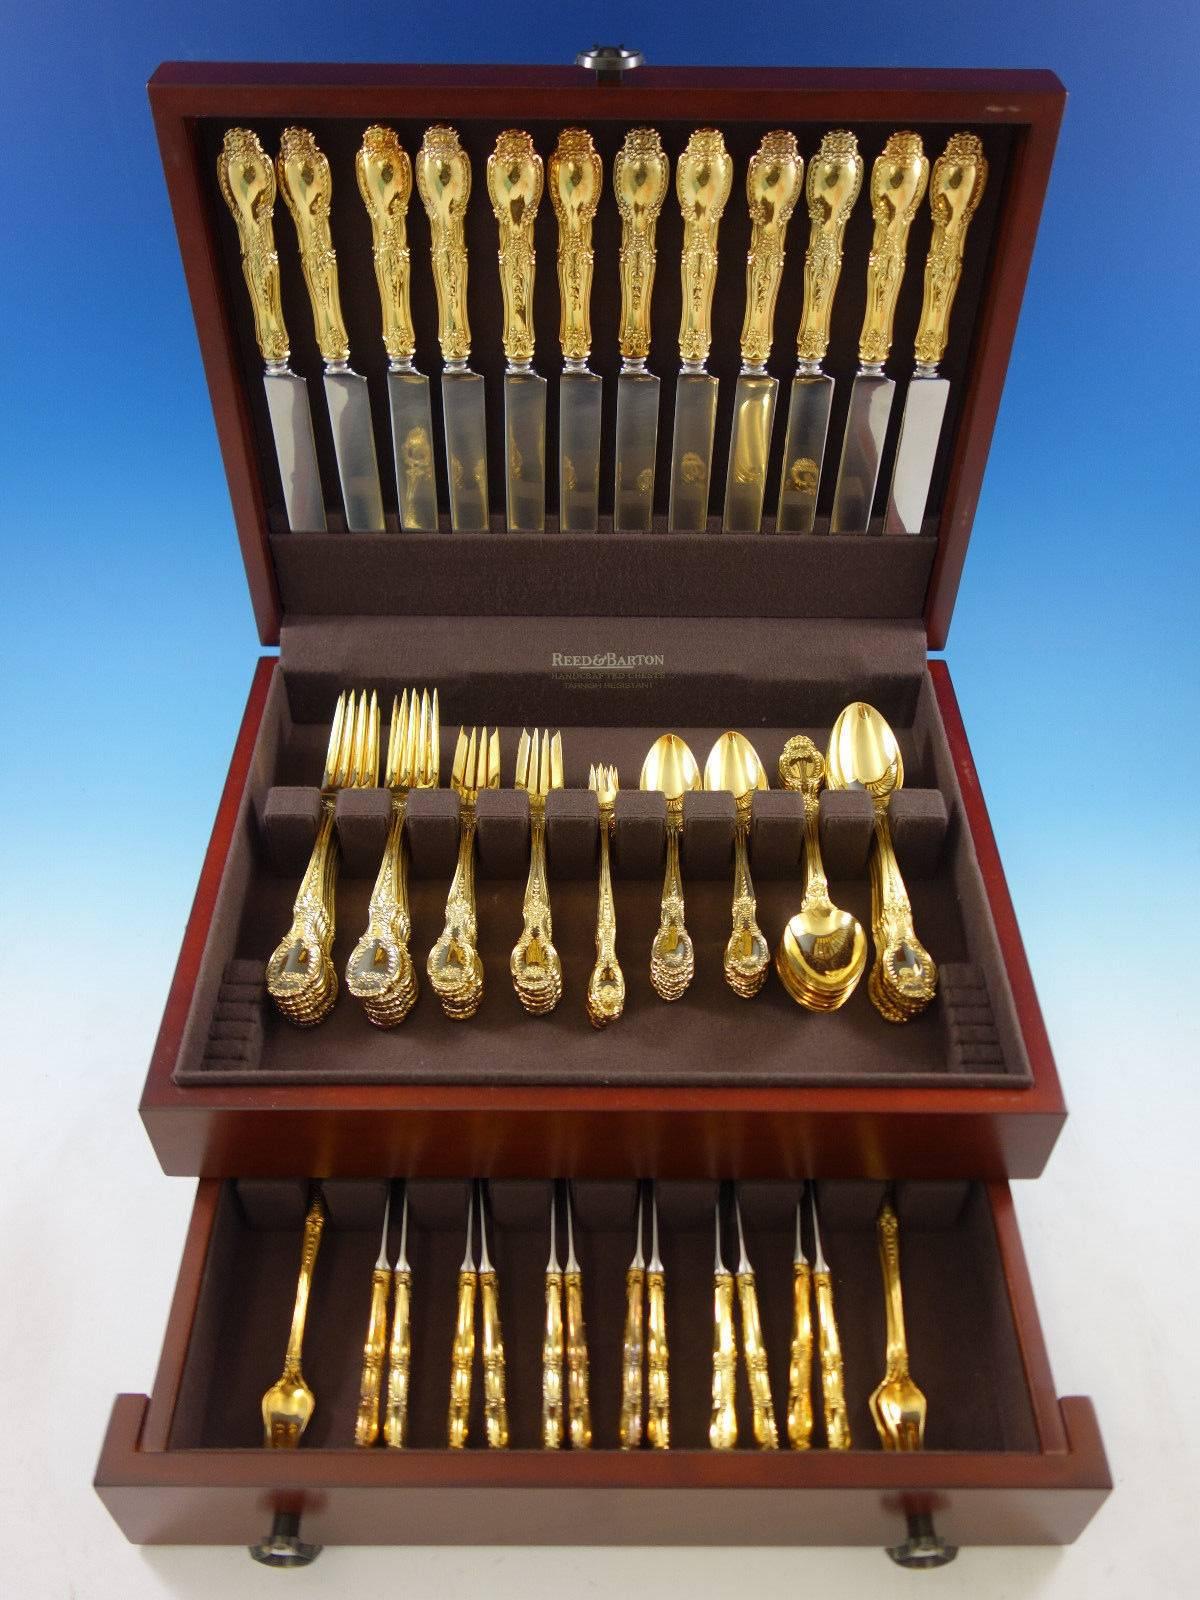 Richelieu by Tiffany & Co. vermeil (completely gold-washed) sterling silver flatware set, 84 pieces. This set includes: 12 dinner size knives, 10 1/4